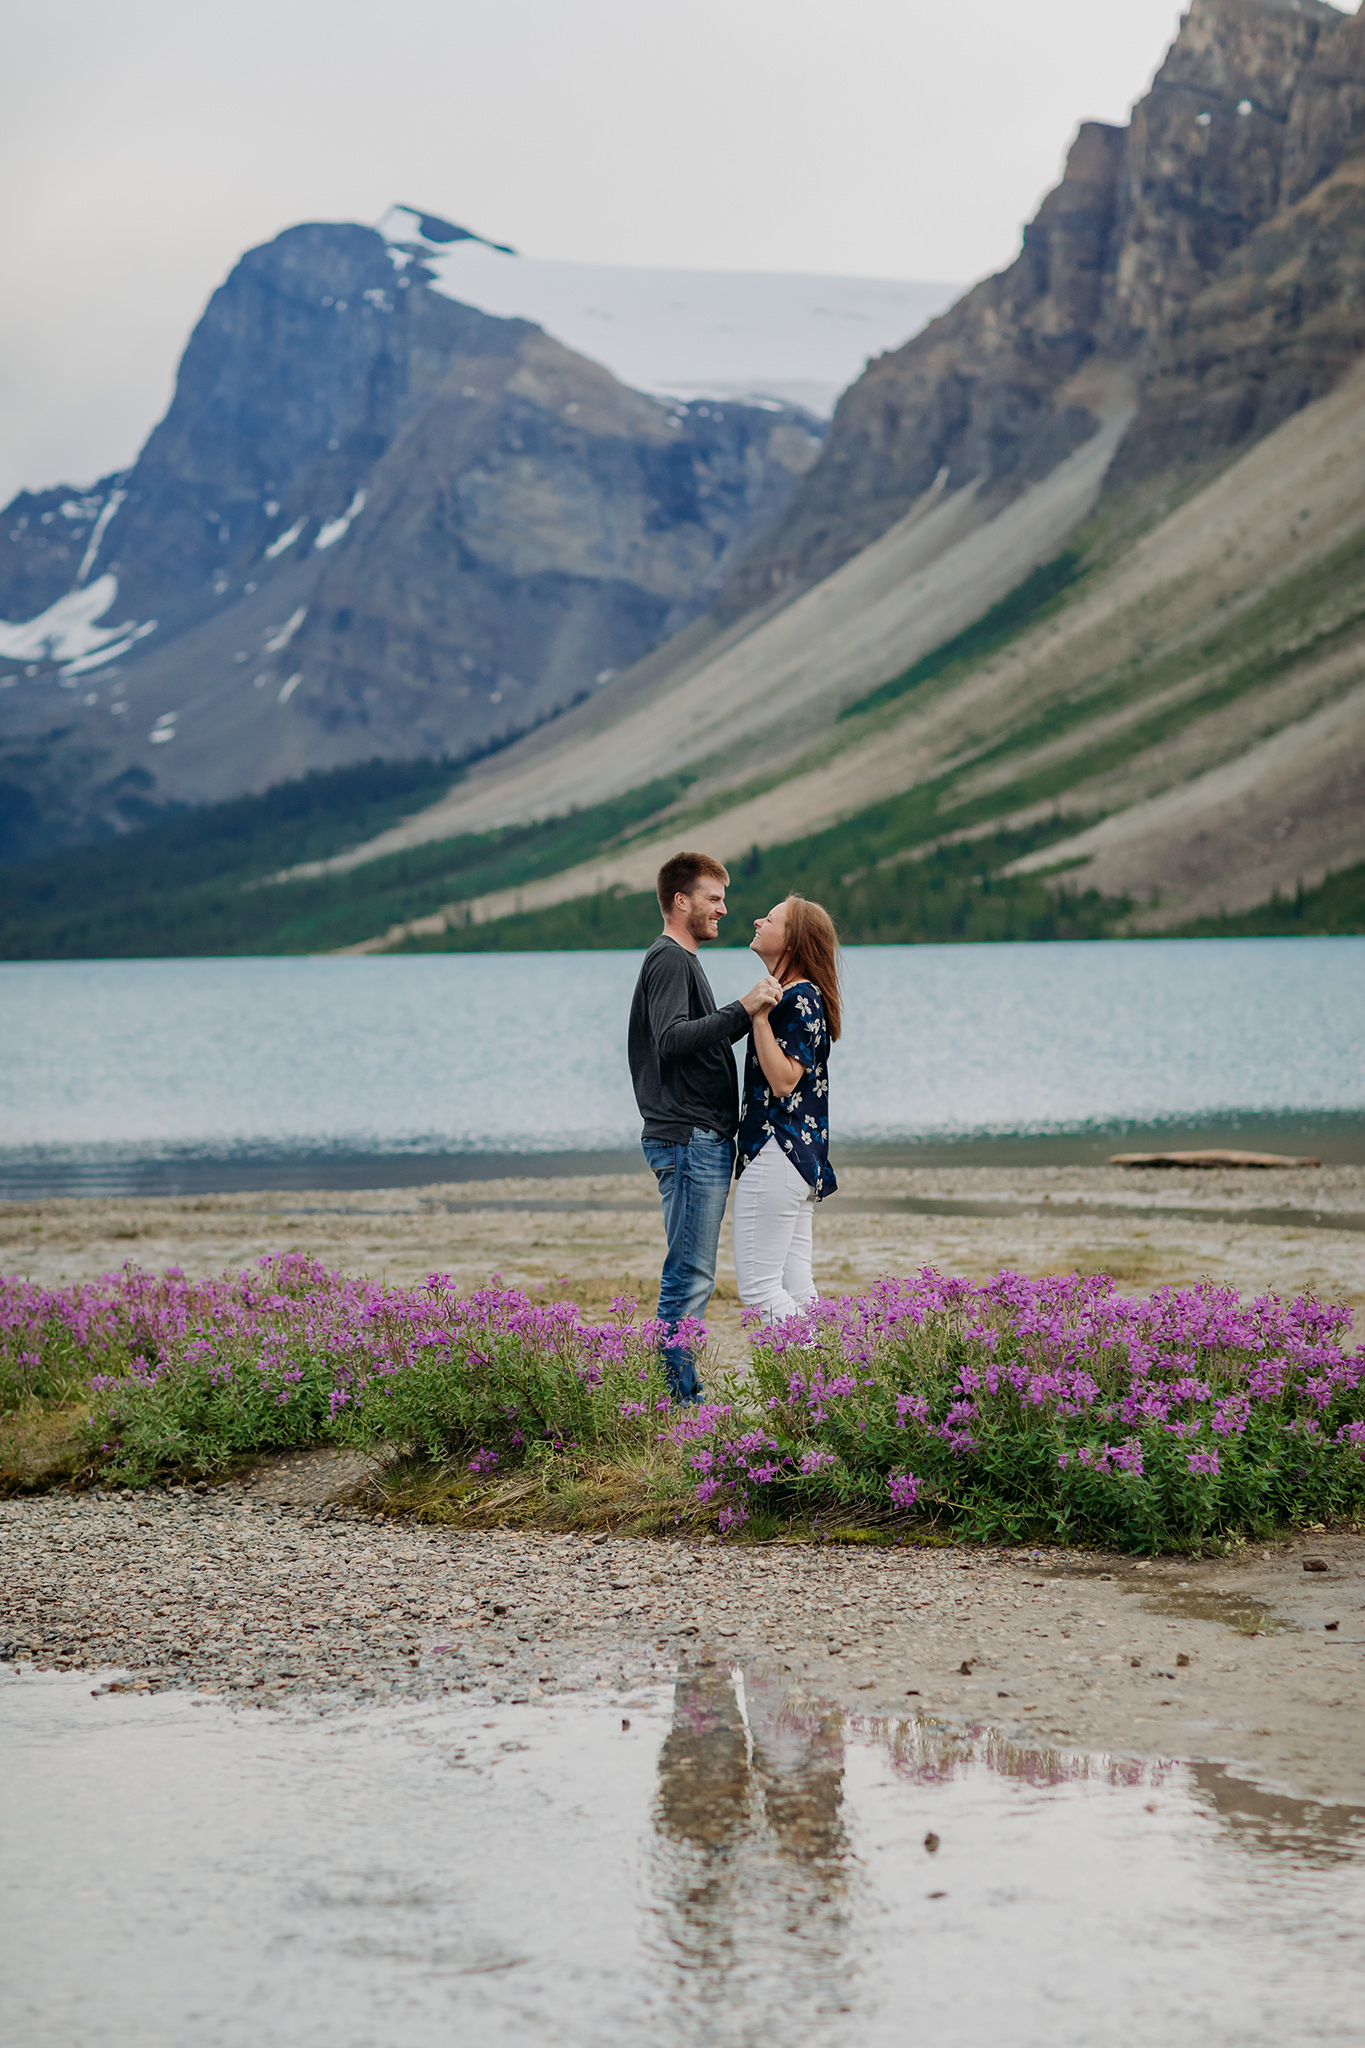 Bow Lake summer couples photography session along Icefields Parkway in Banff National Park photographed by local wedding & elopement photographer ENV Photography